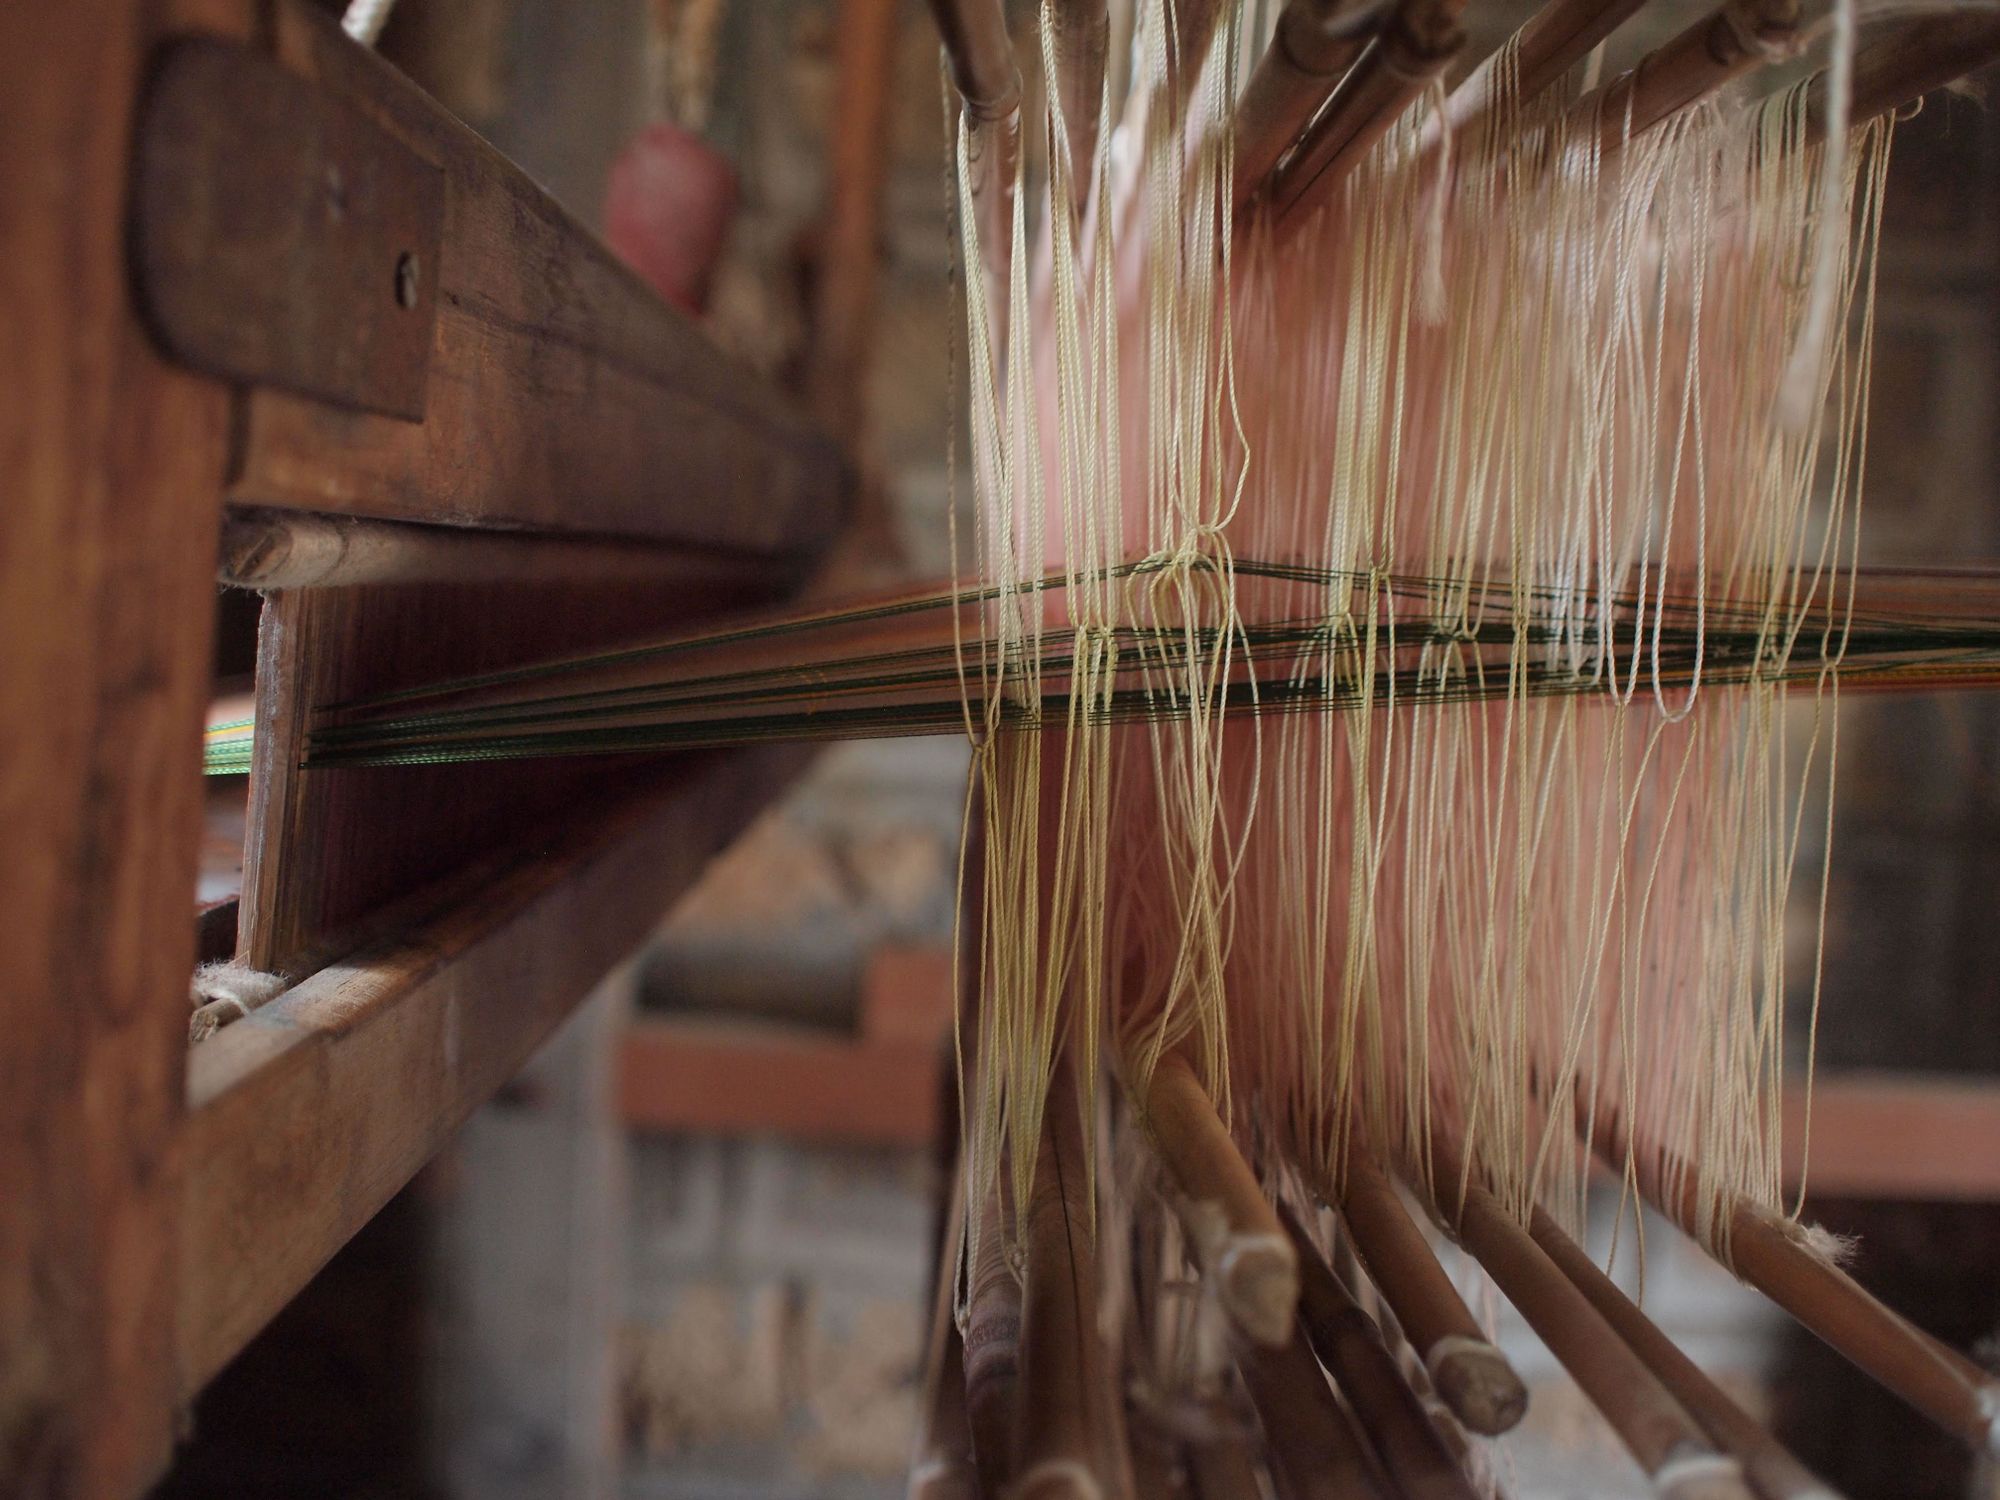 A close up photo of the heddles and threads of a loom